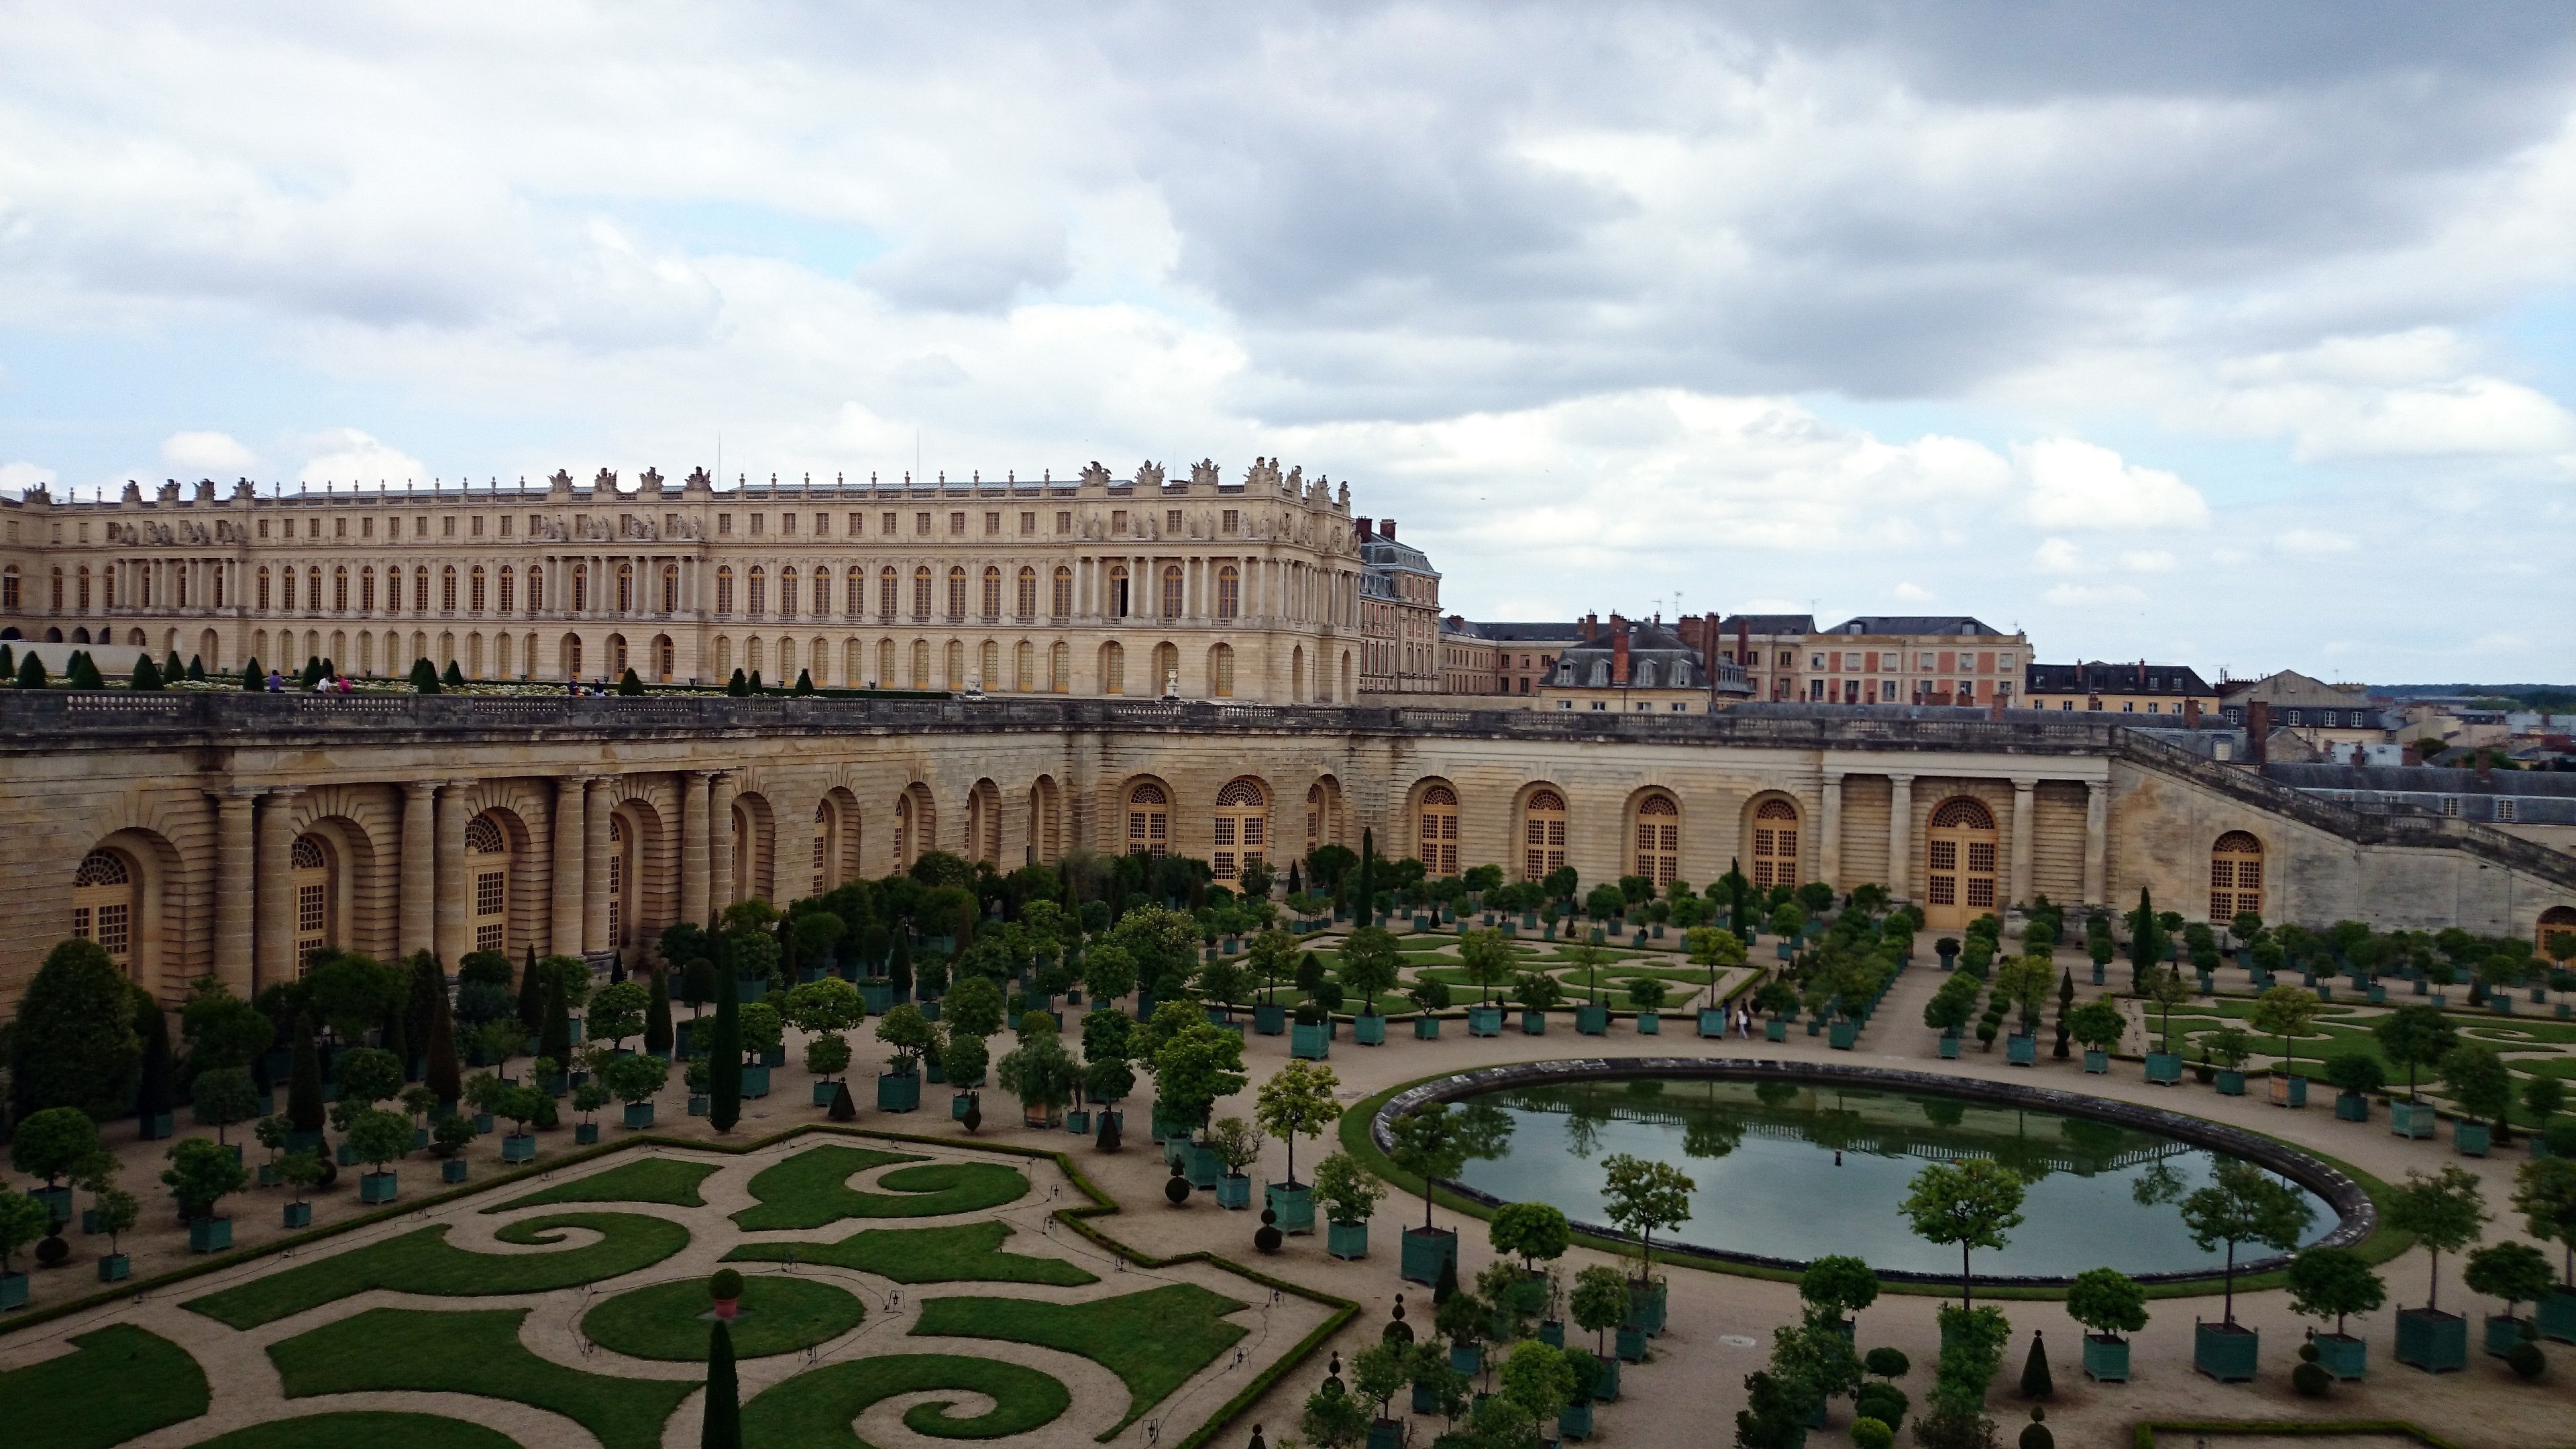 Palace and gardens of Versailles, Day trip from Paris, Visions of travel, Cultural experience, 3840x2160 4K Desktop